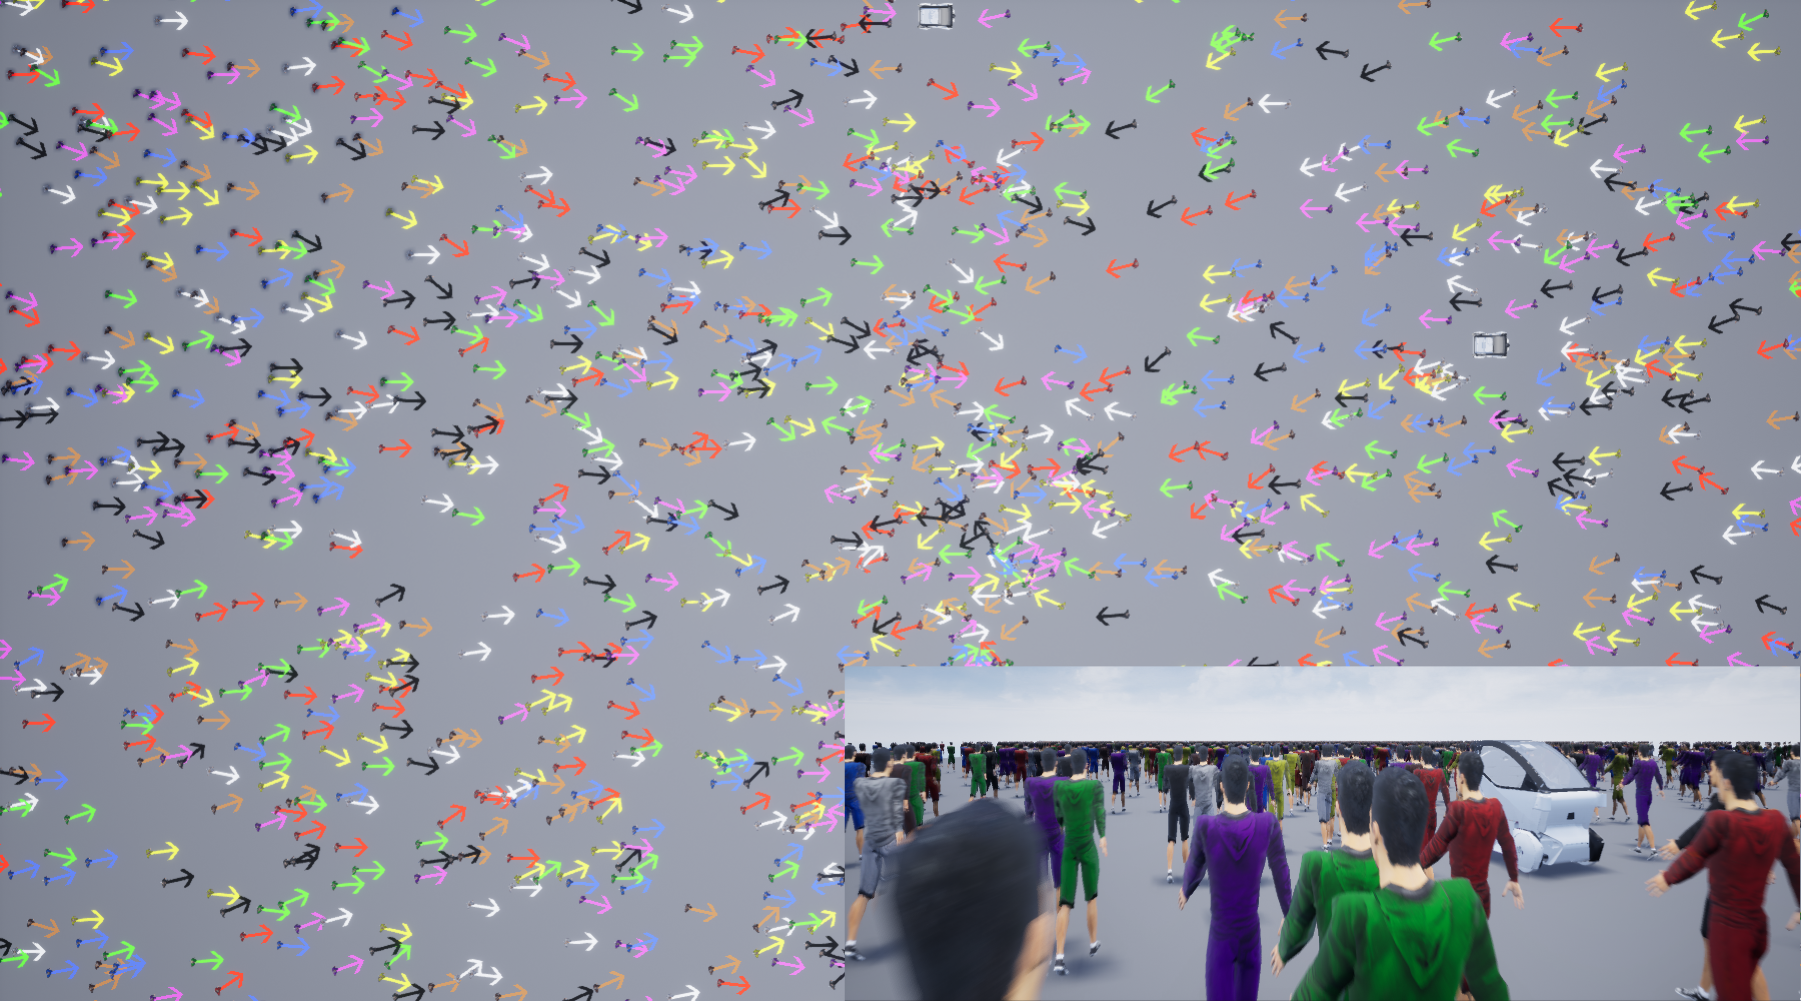 Birds-eye view of a virtual simulation of many thousands of people. Inset image: eye-level view of the same simulation, showing nearby people and an autonomous vehicle.